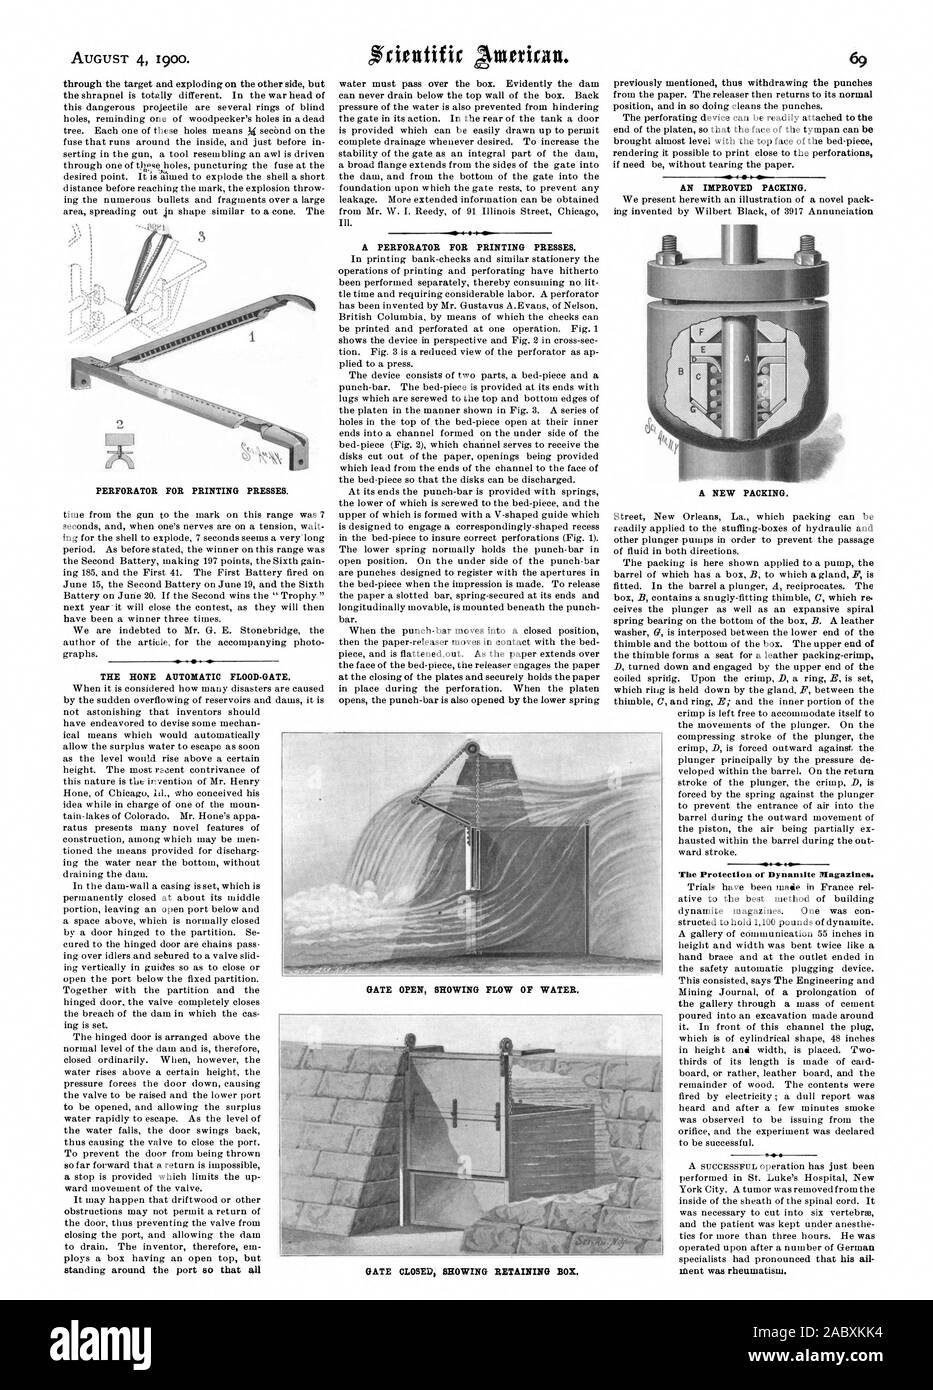 The Protection of Dynamite Magazines., scientific american, 1900-08-04 Stock Photo